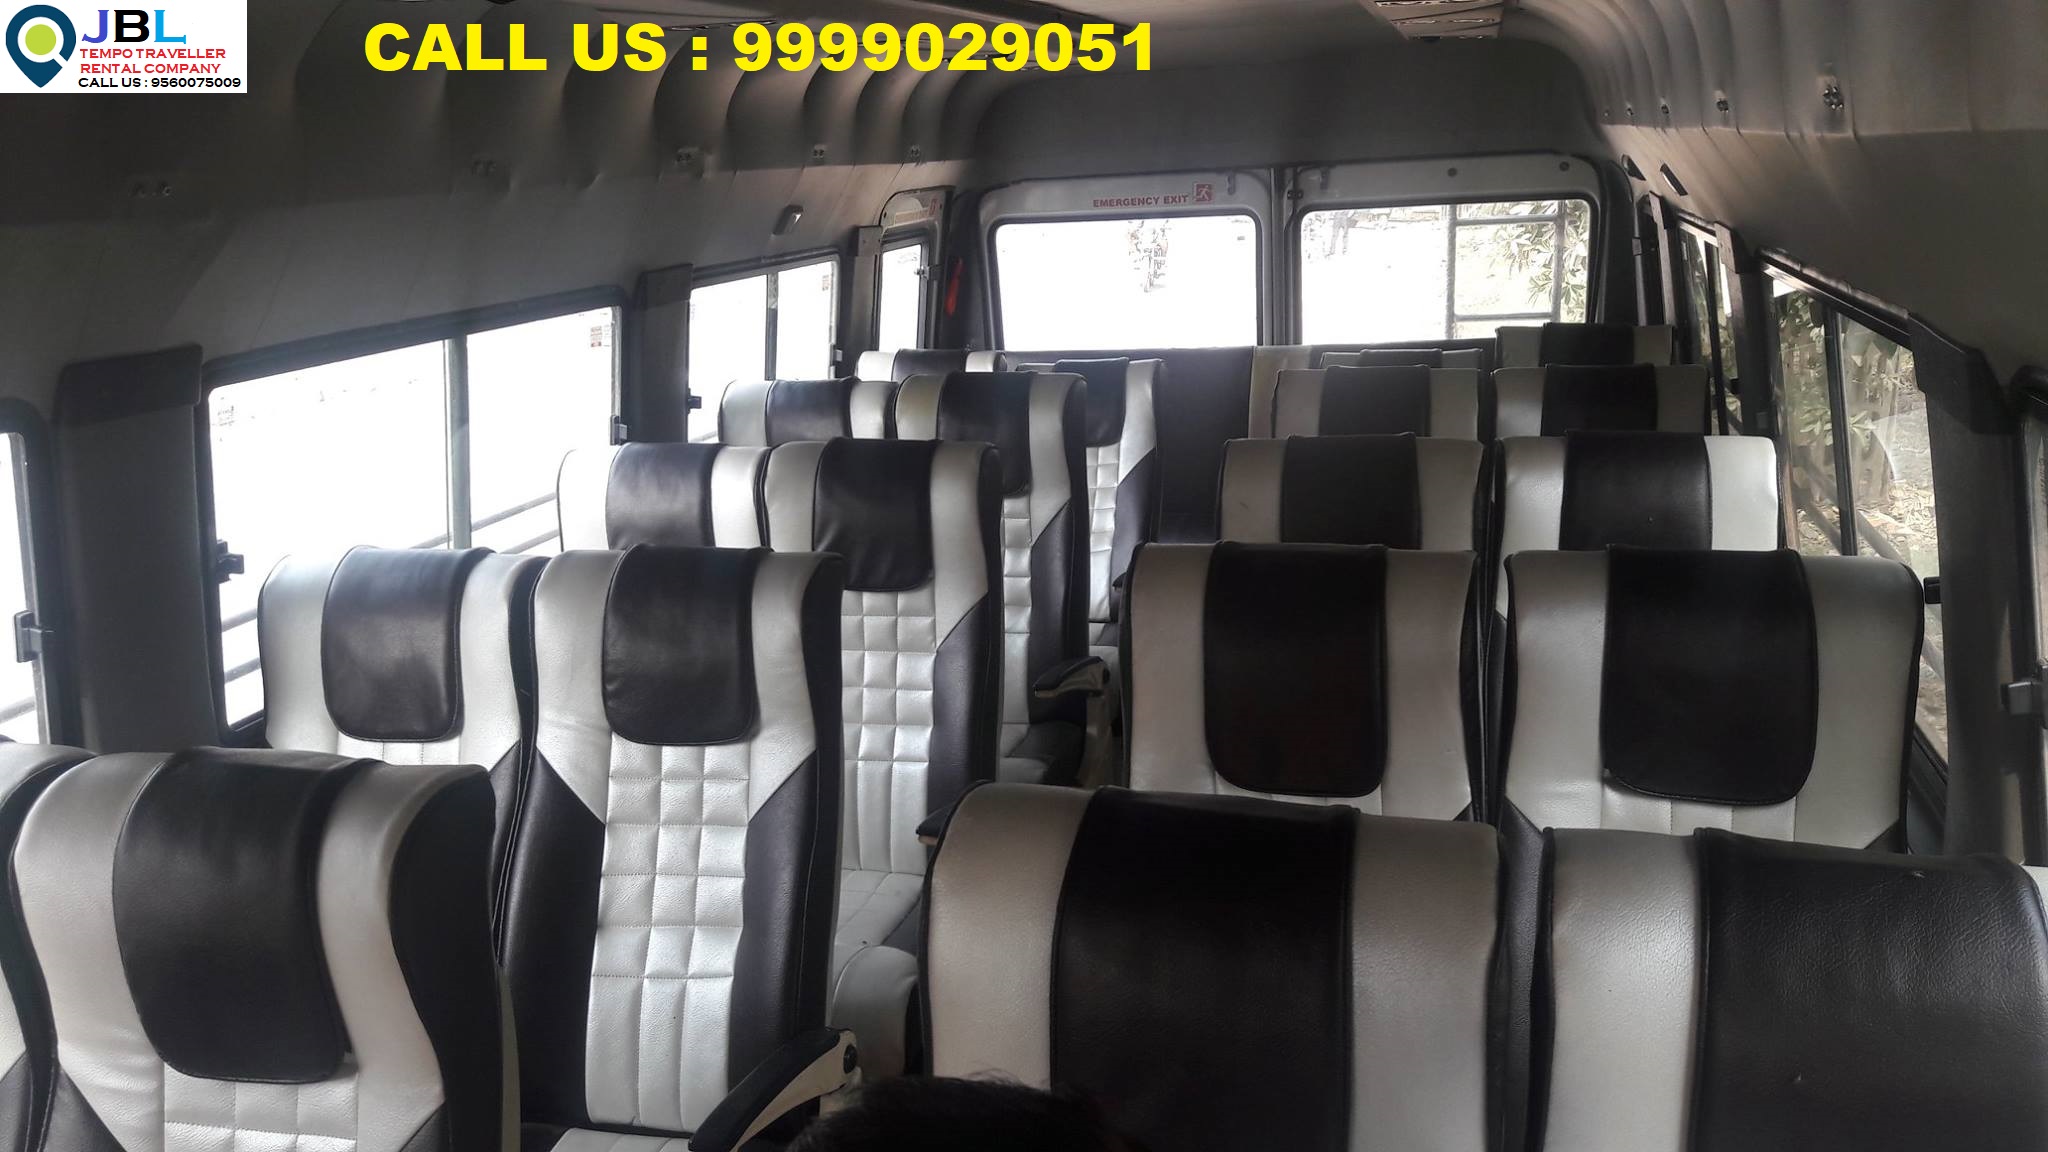 Rent tempo traveller in Sector 80 Faridabad